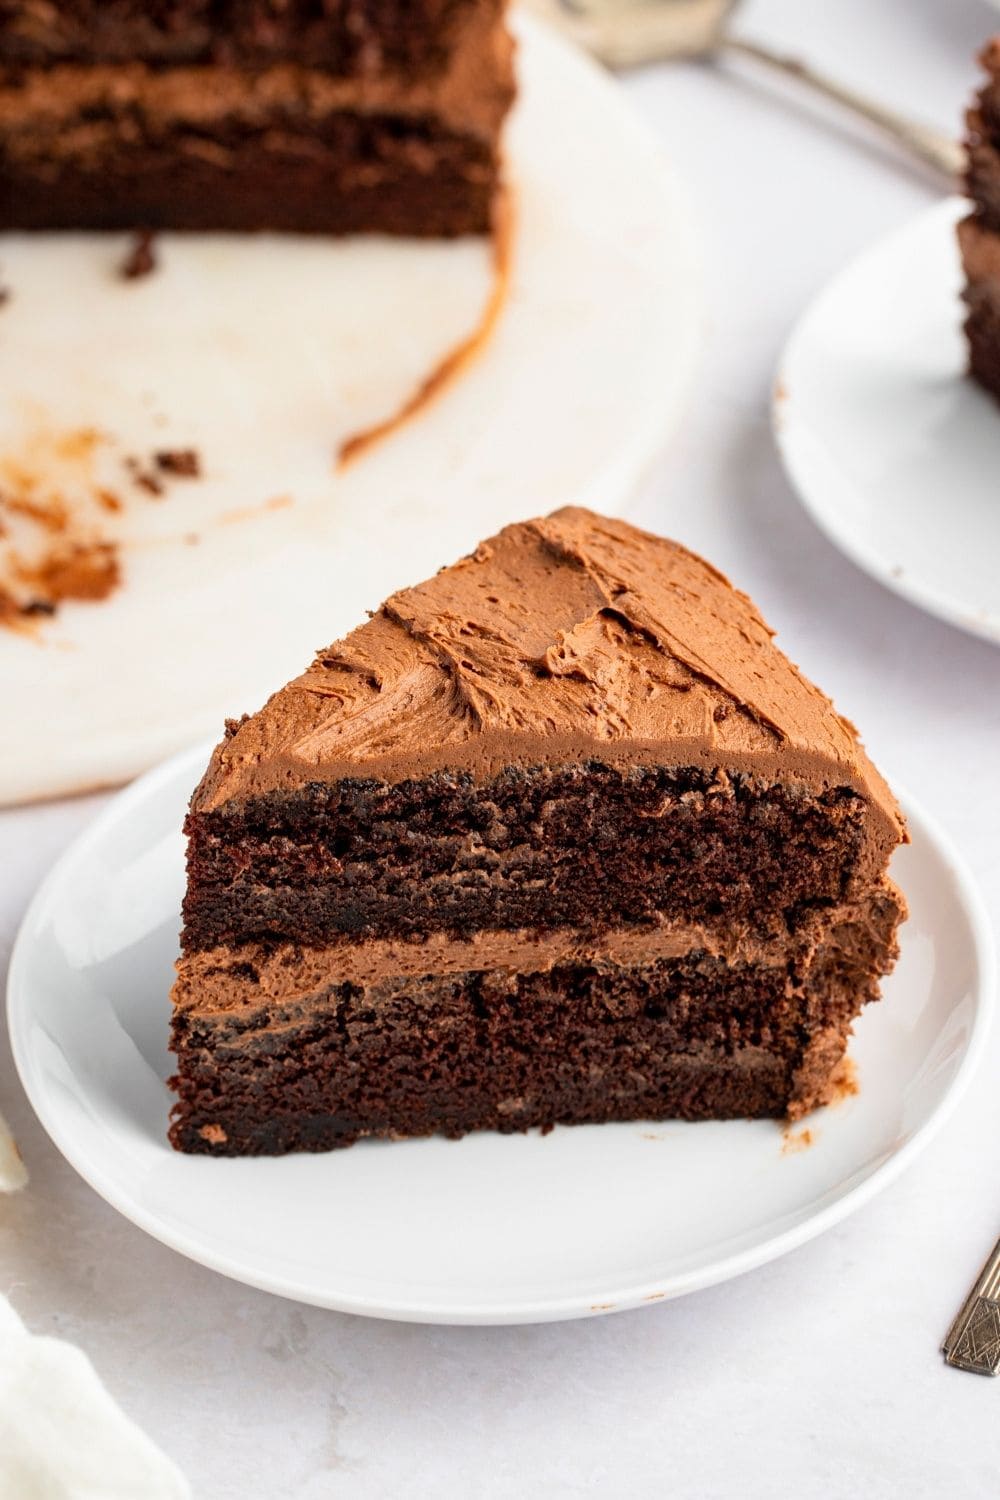 Slick of Chocolate Cake with chocolate frosting on top